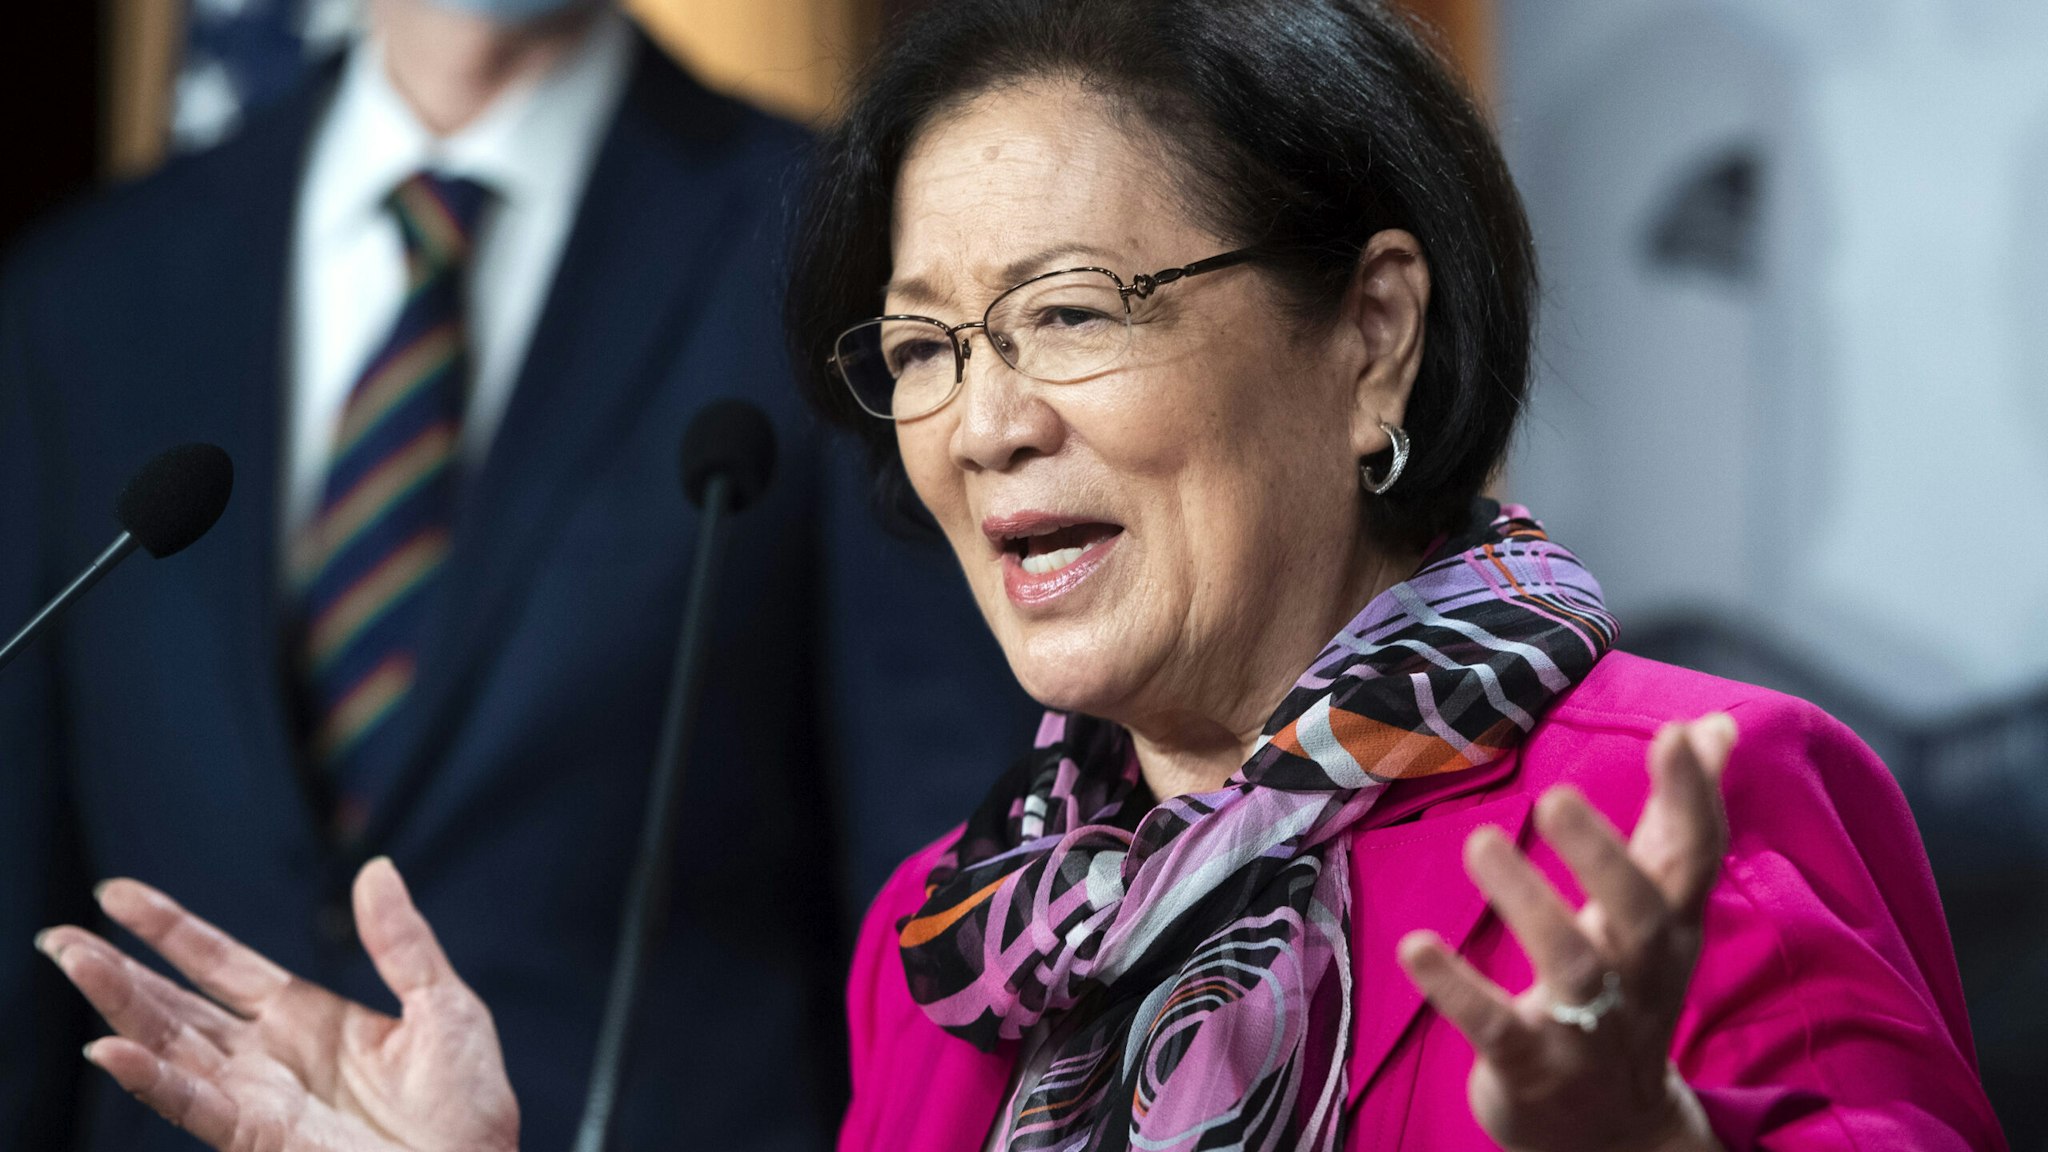 UNITED STATES - SEPTEMBER 30: Sen. Mazie Hirono, D-Hawaii, conducts a news conference with Senate Democrats where they addressed topics including the Supreme Court nominee and health care in the Capitol on Wednesday, September 30, 2020.